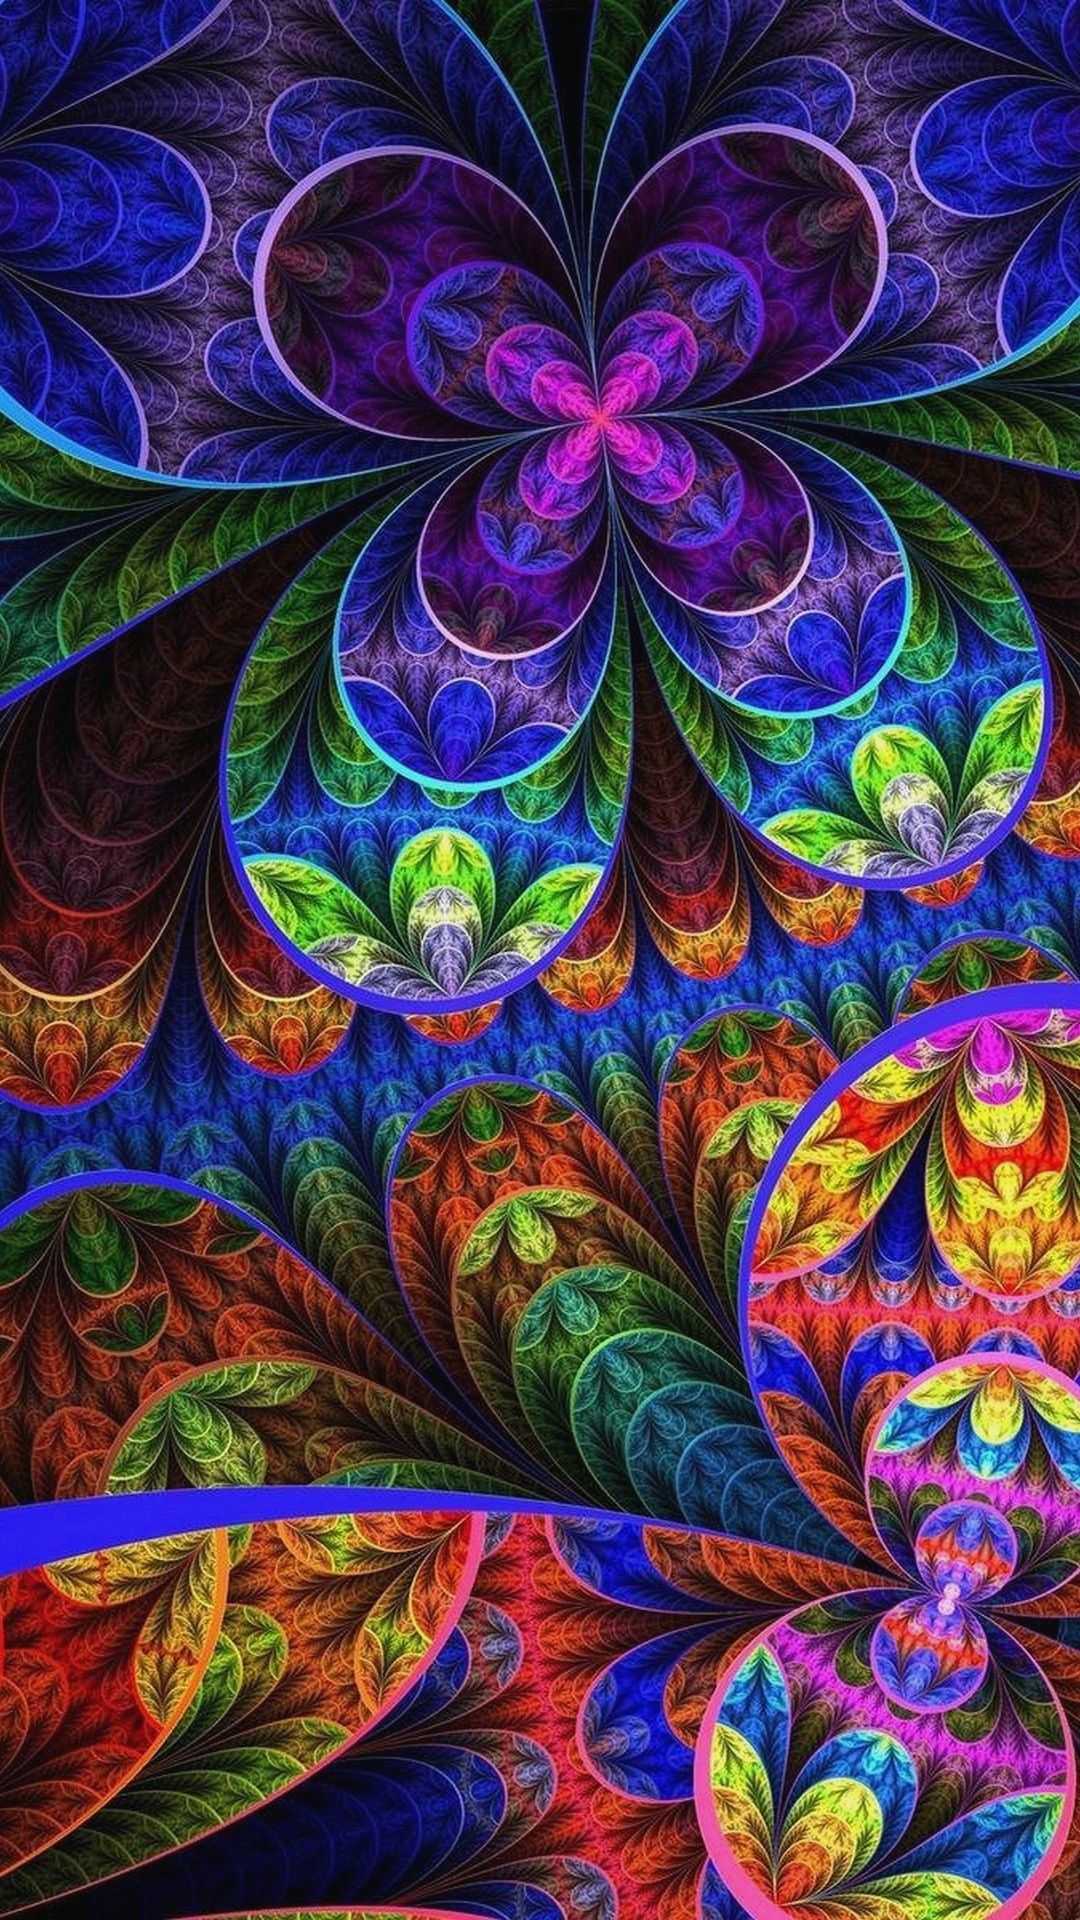 Trippy Stoner Wallpapers